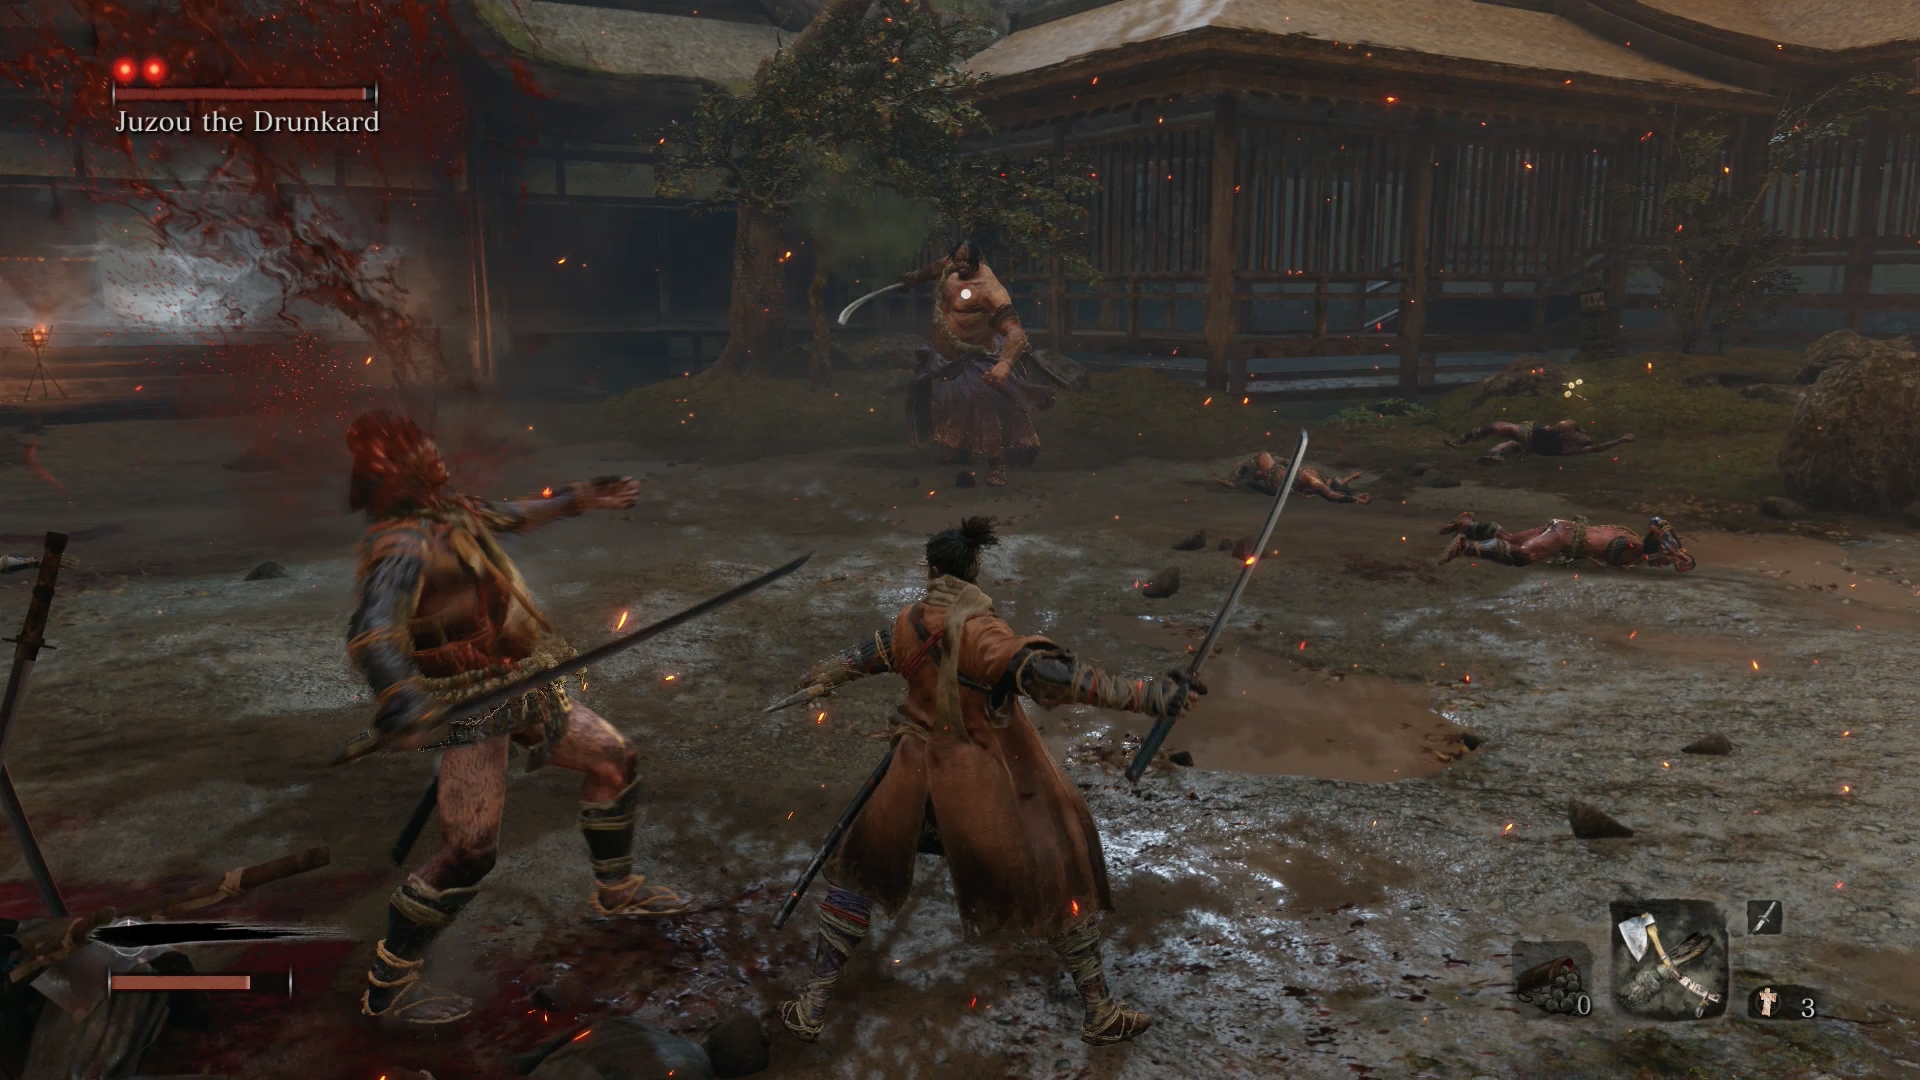 Clear out regular enemies first | How to beat Jouzou The Drunkard in Sekiro: Shadows Die Twice